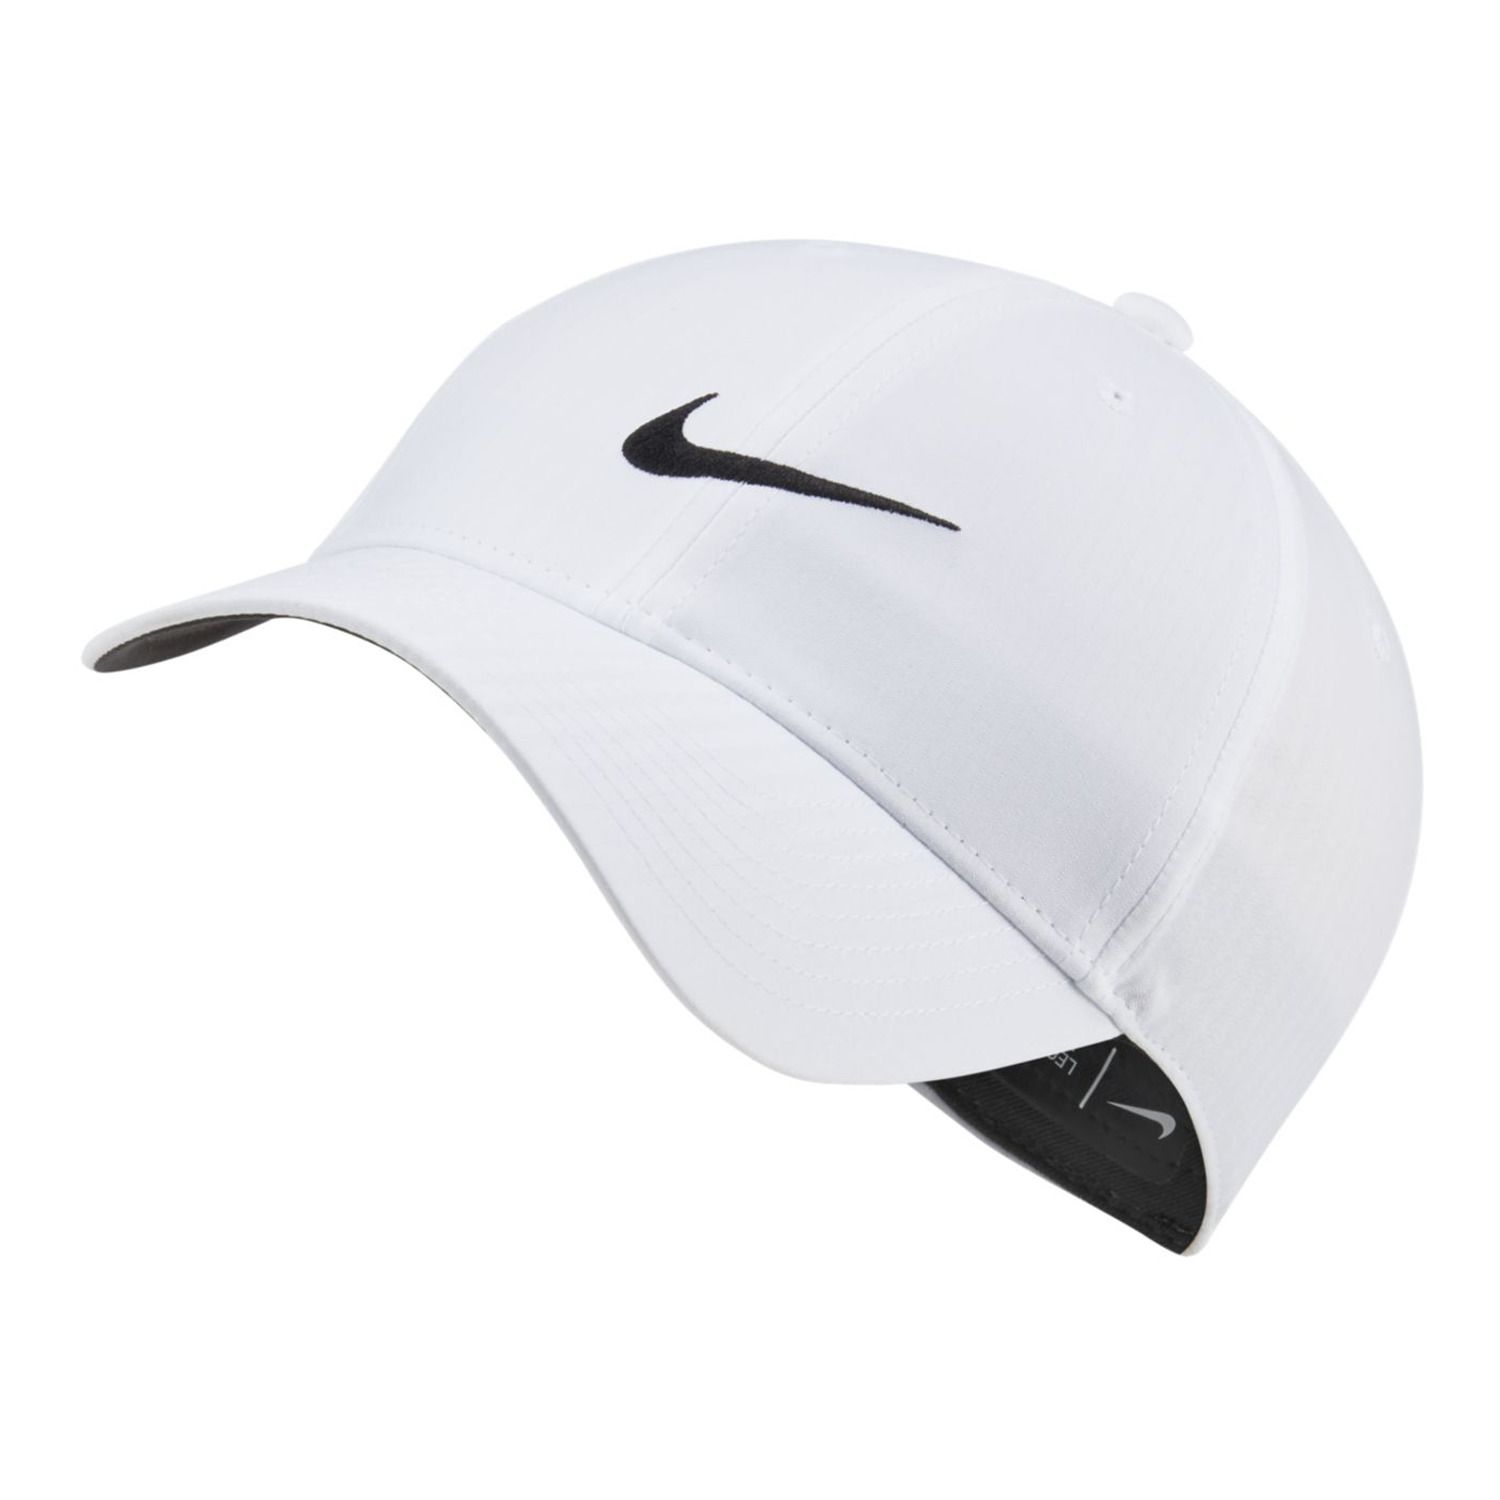 White Nike Hats - Accessories | Kohl's